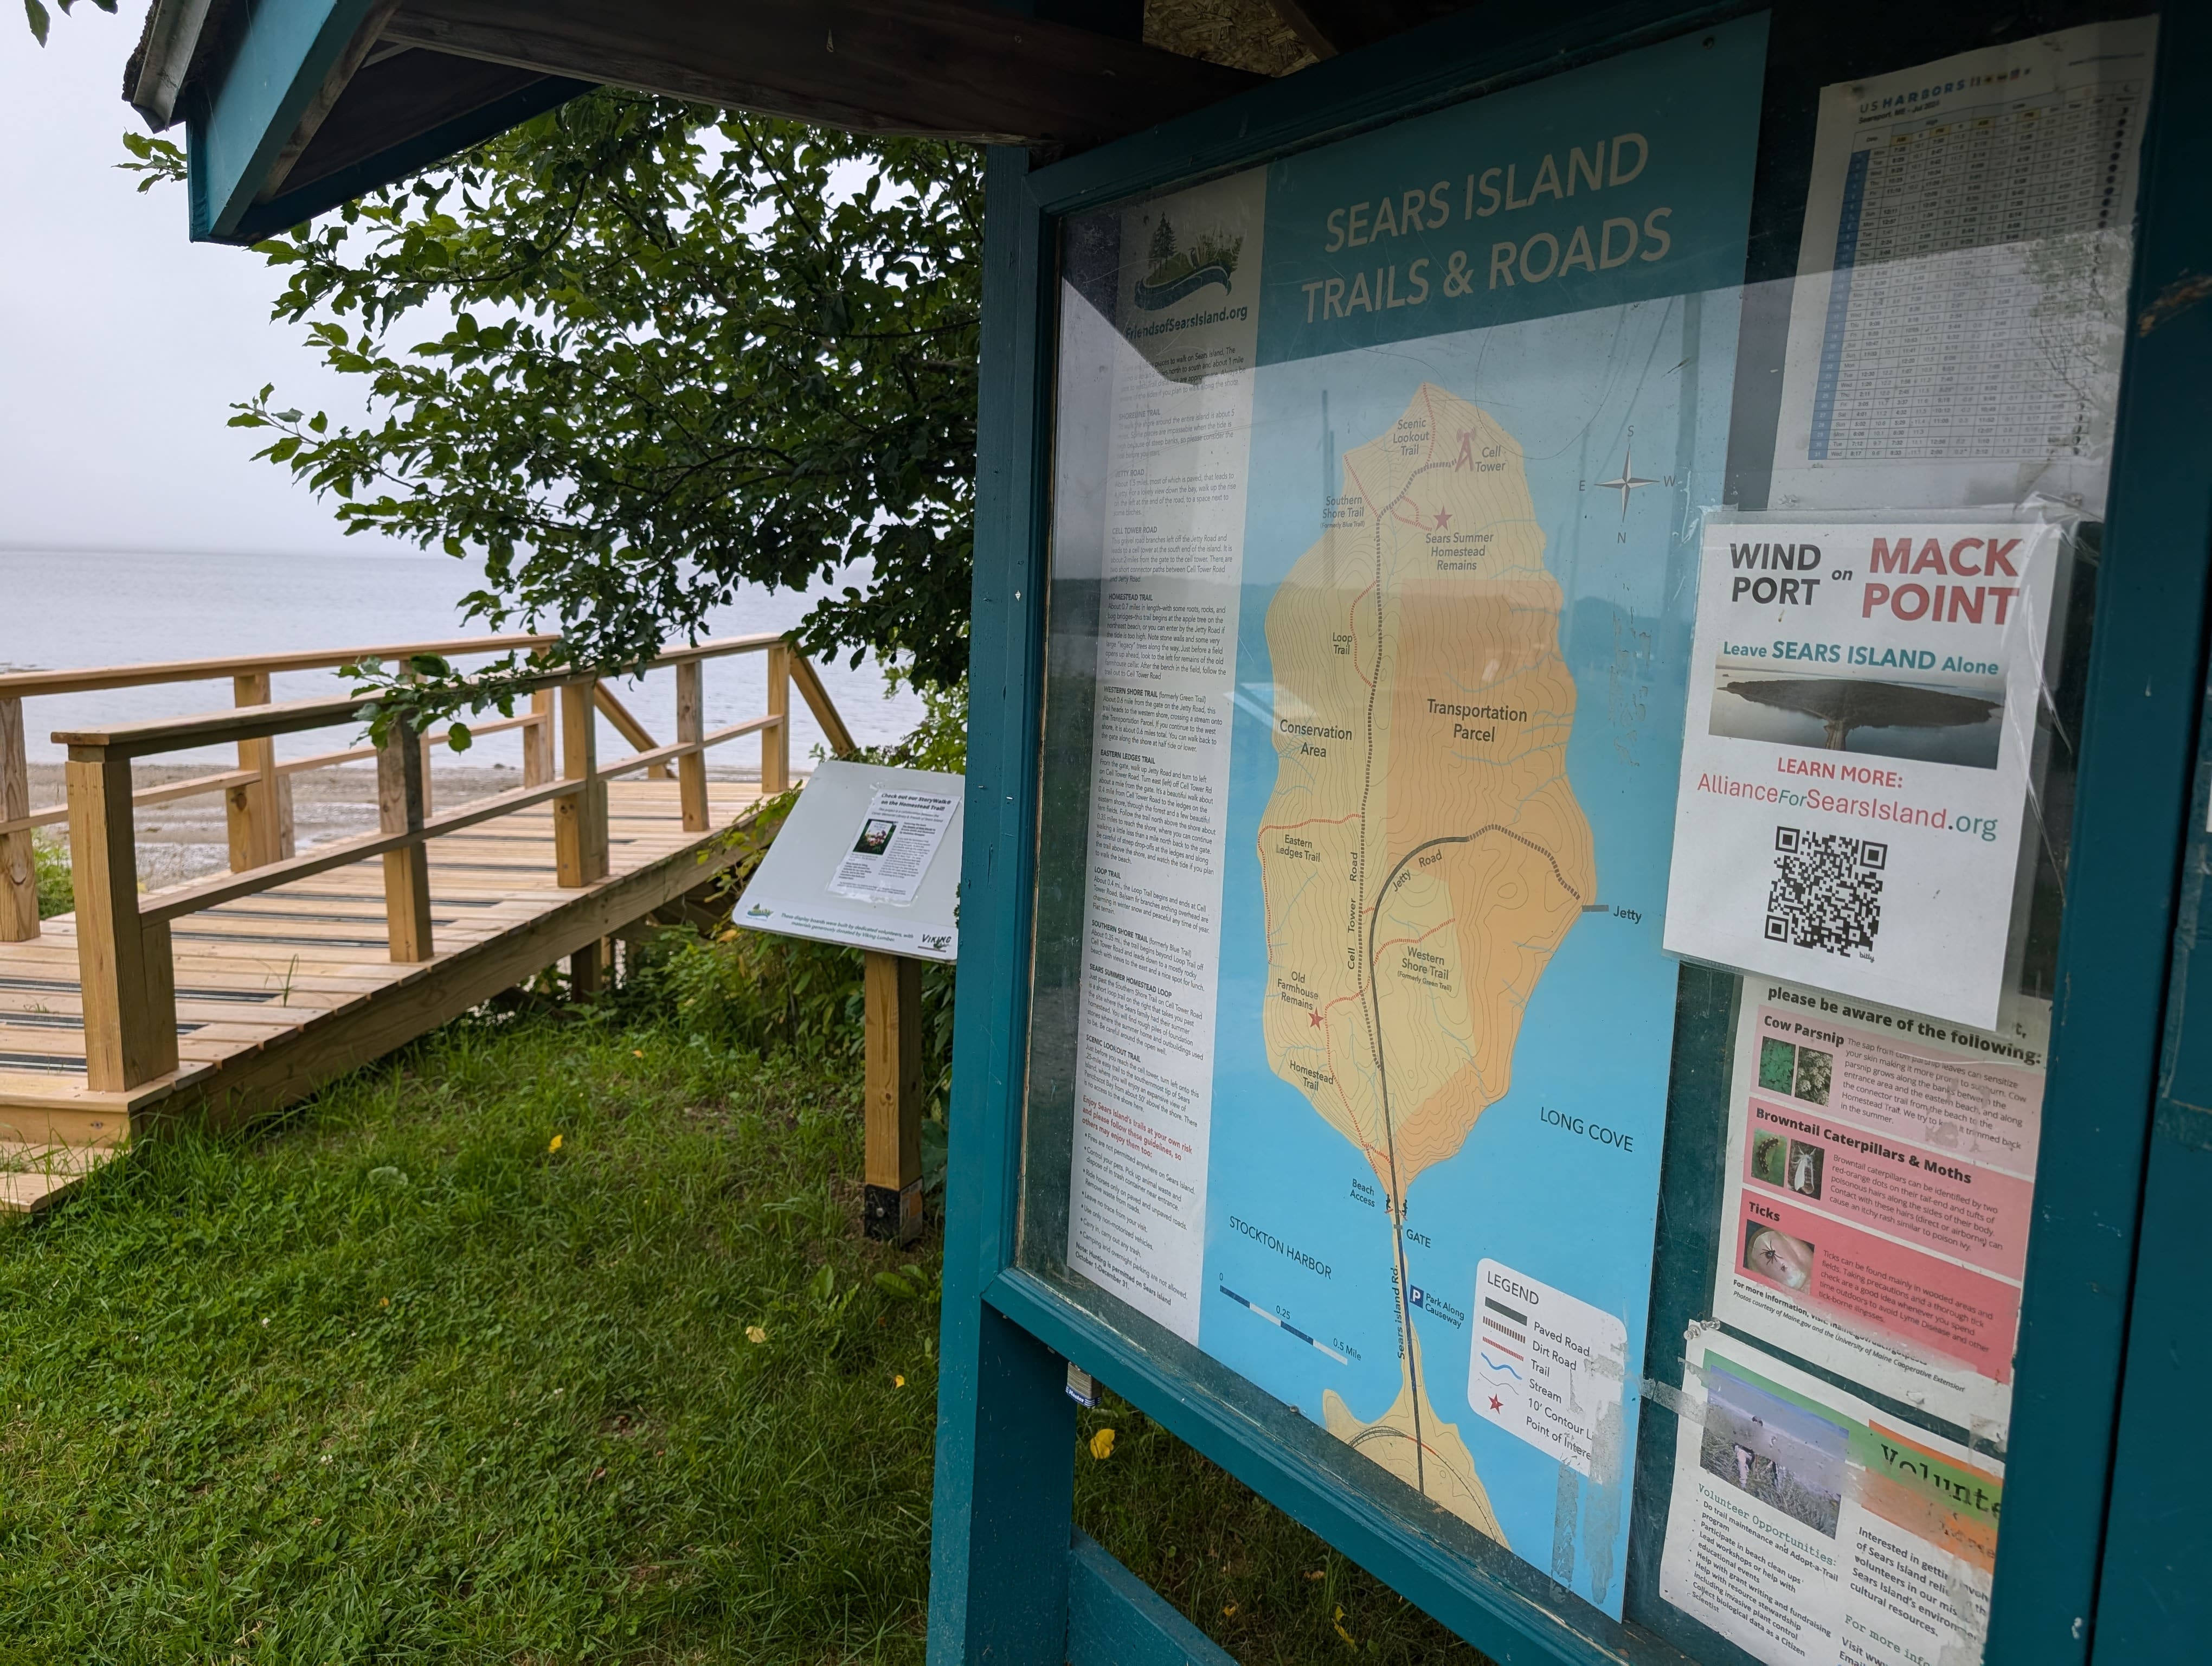 A wood pier leading to water sits next to a patch of grass with a sign showing an island map.